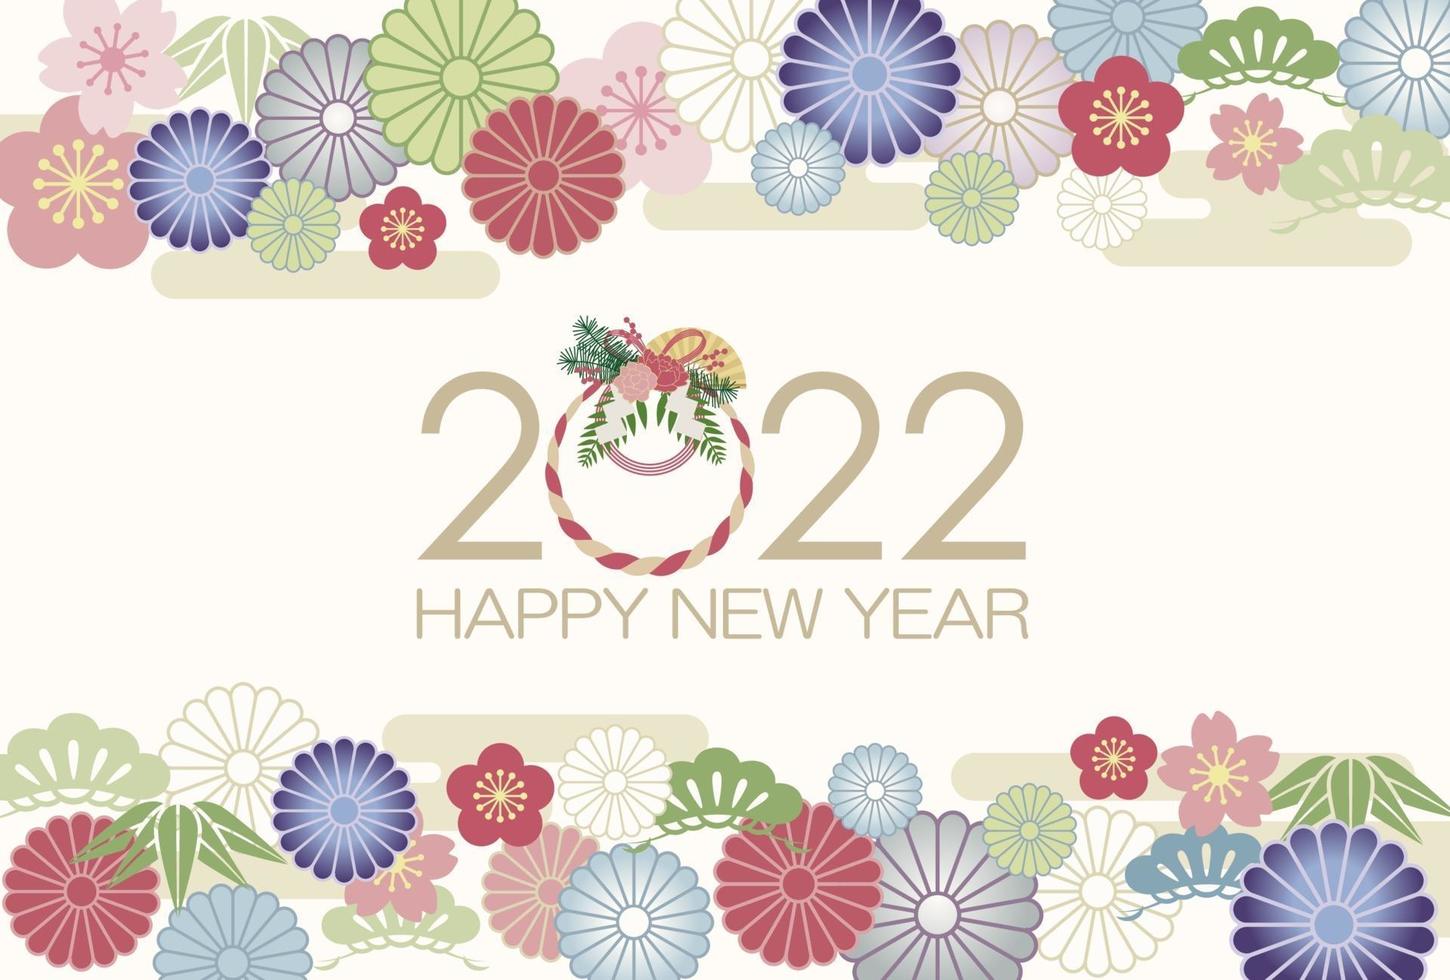 2022 Greeting Card Template Decorated With Japanese Vintage Charms. vector